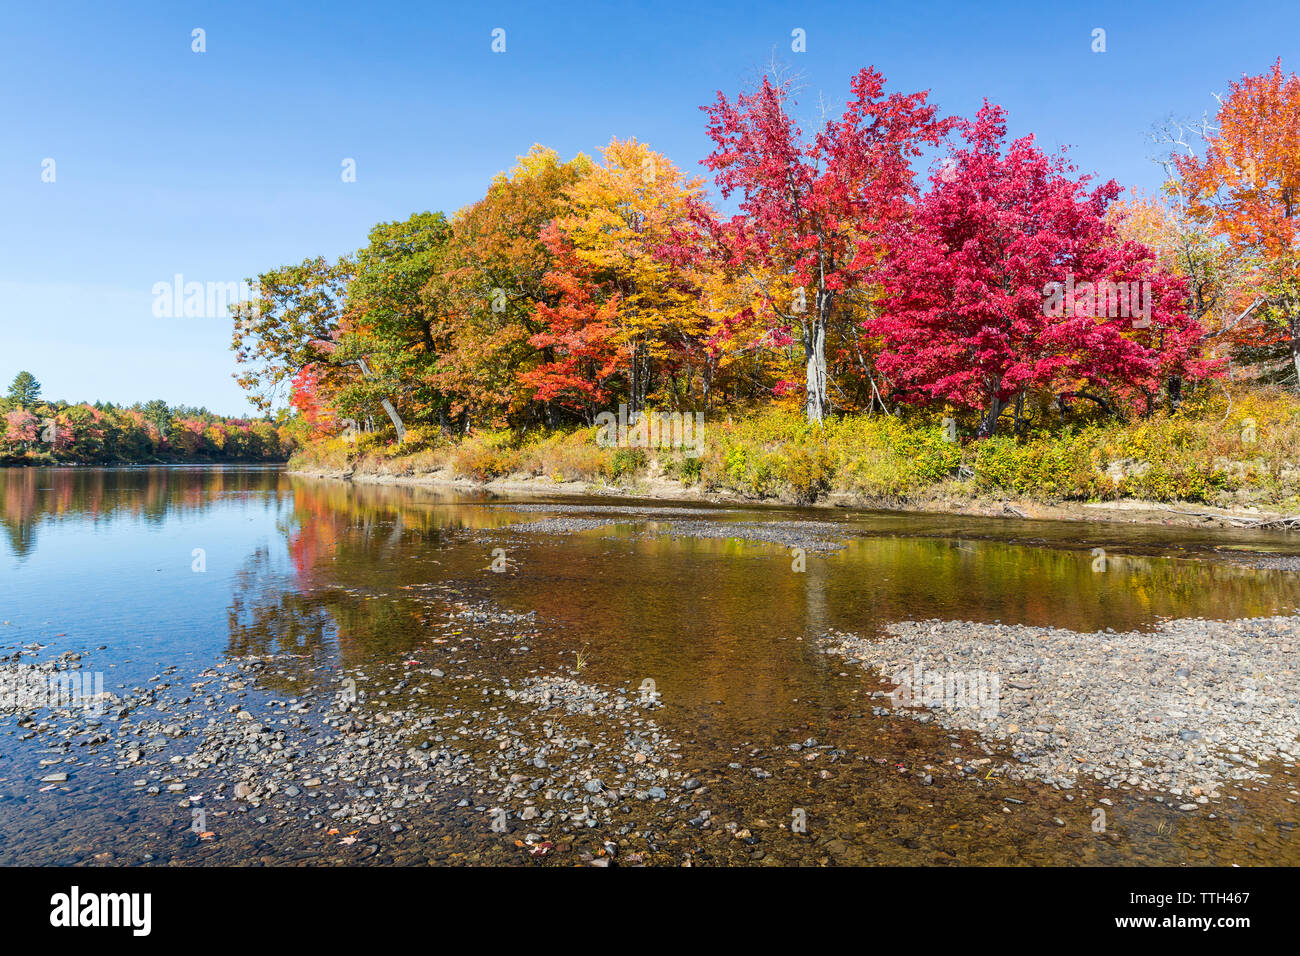 Fall foliage on the East Branch of the Penobscot River in Maine. Stock Photo